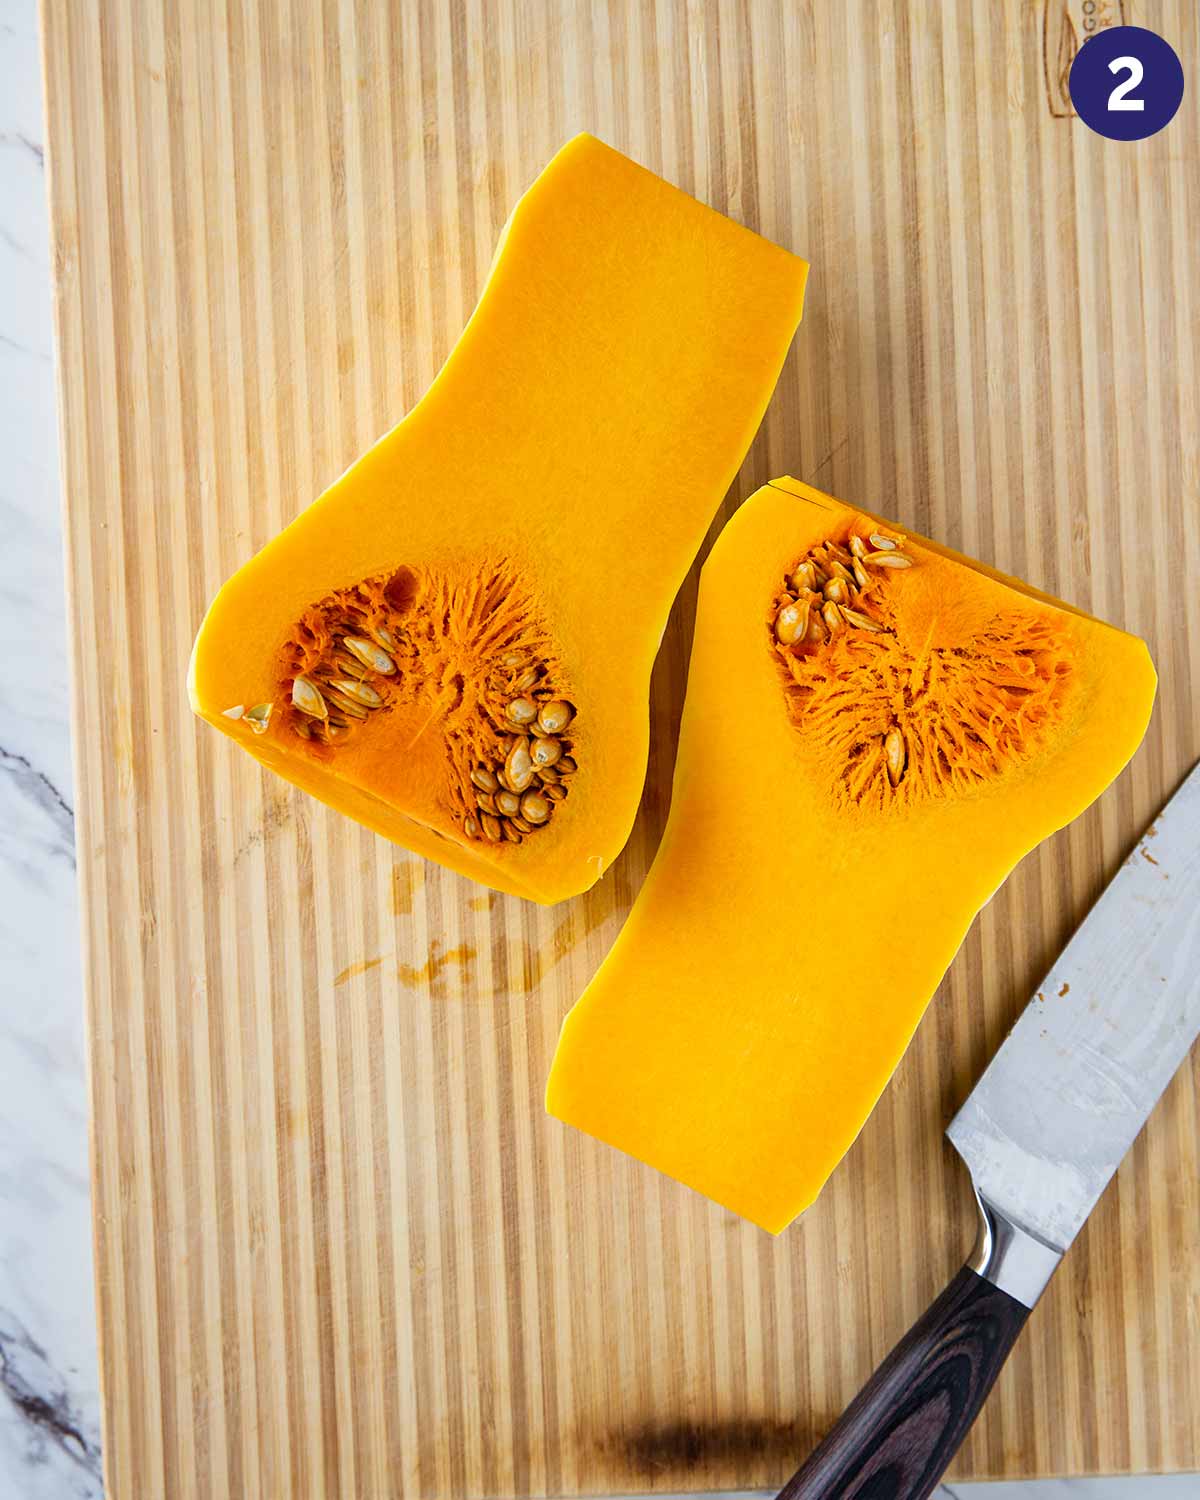 Peeled butternut squash cut into half and placed on a wooden cutting board.